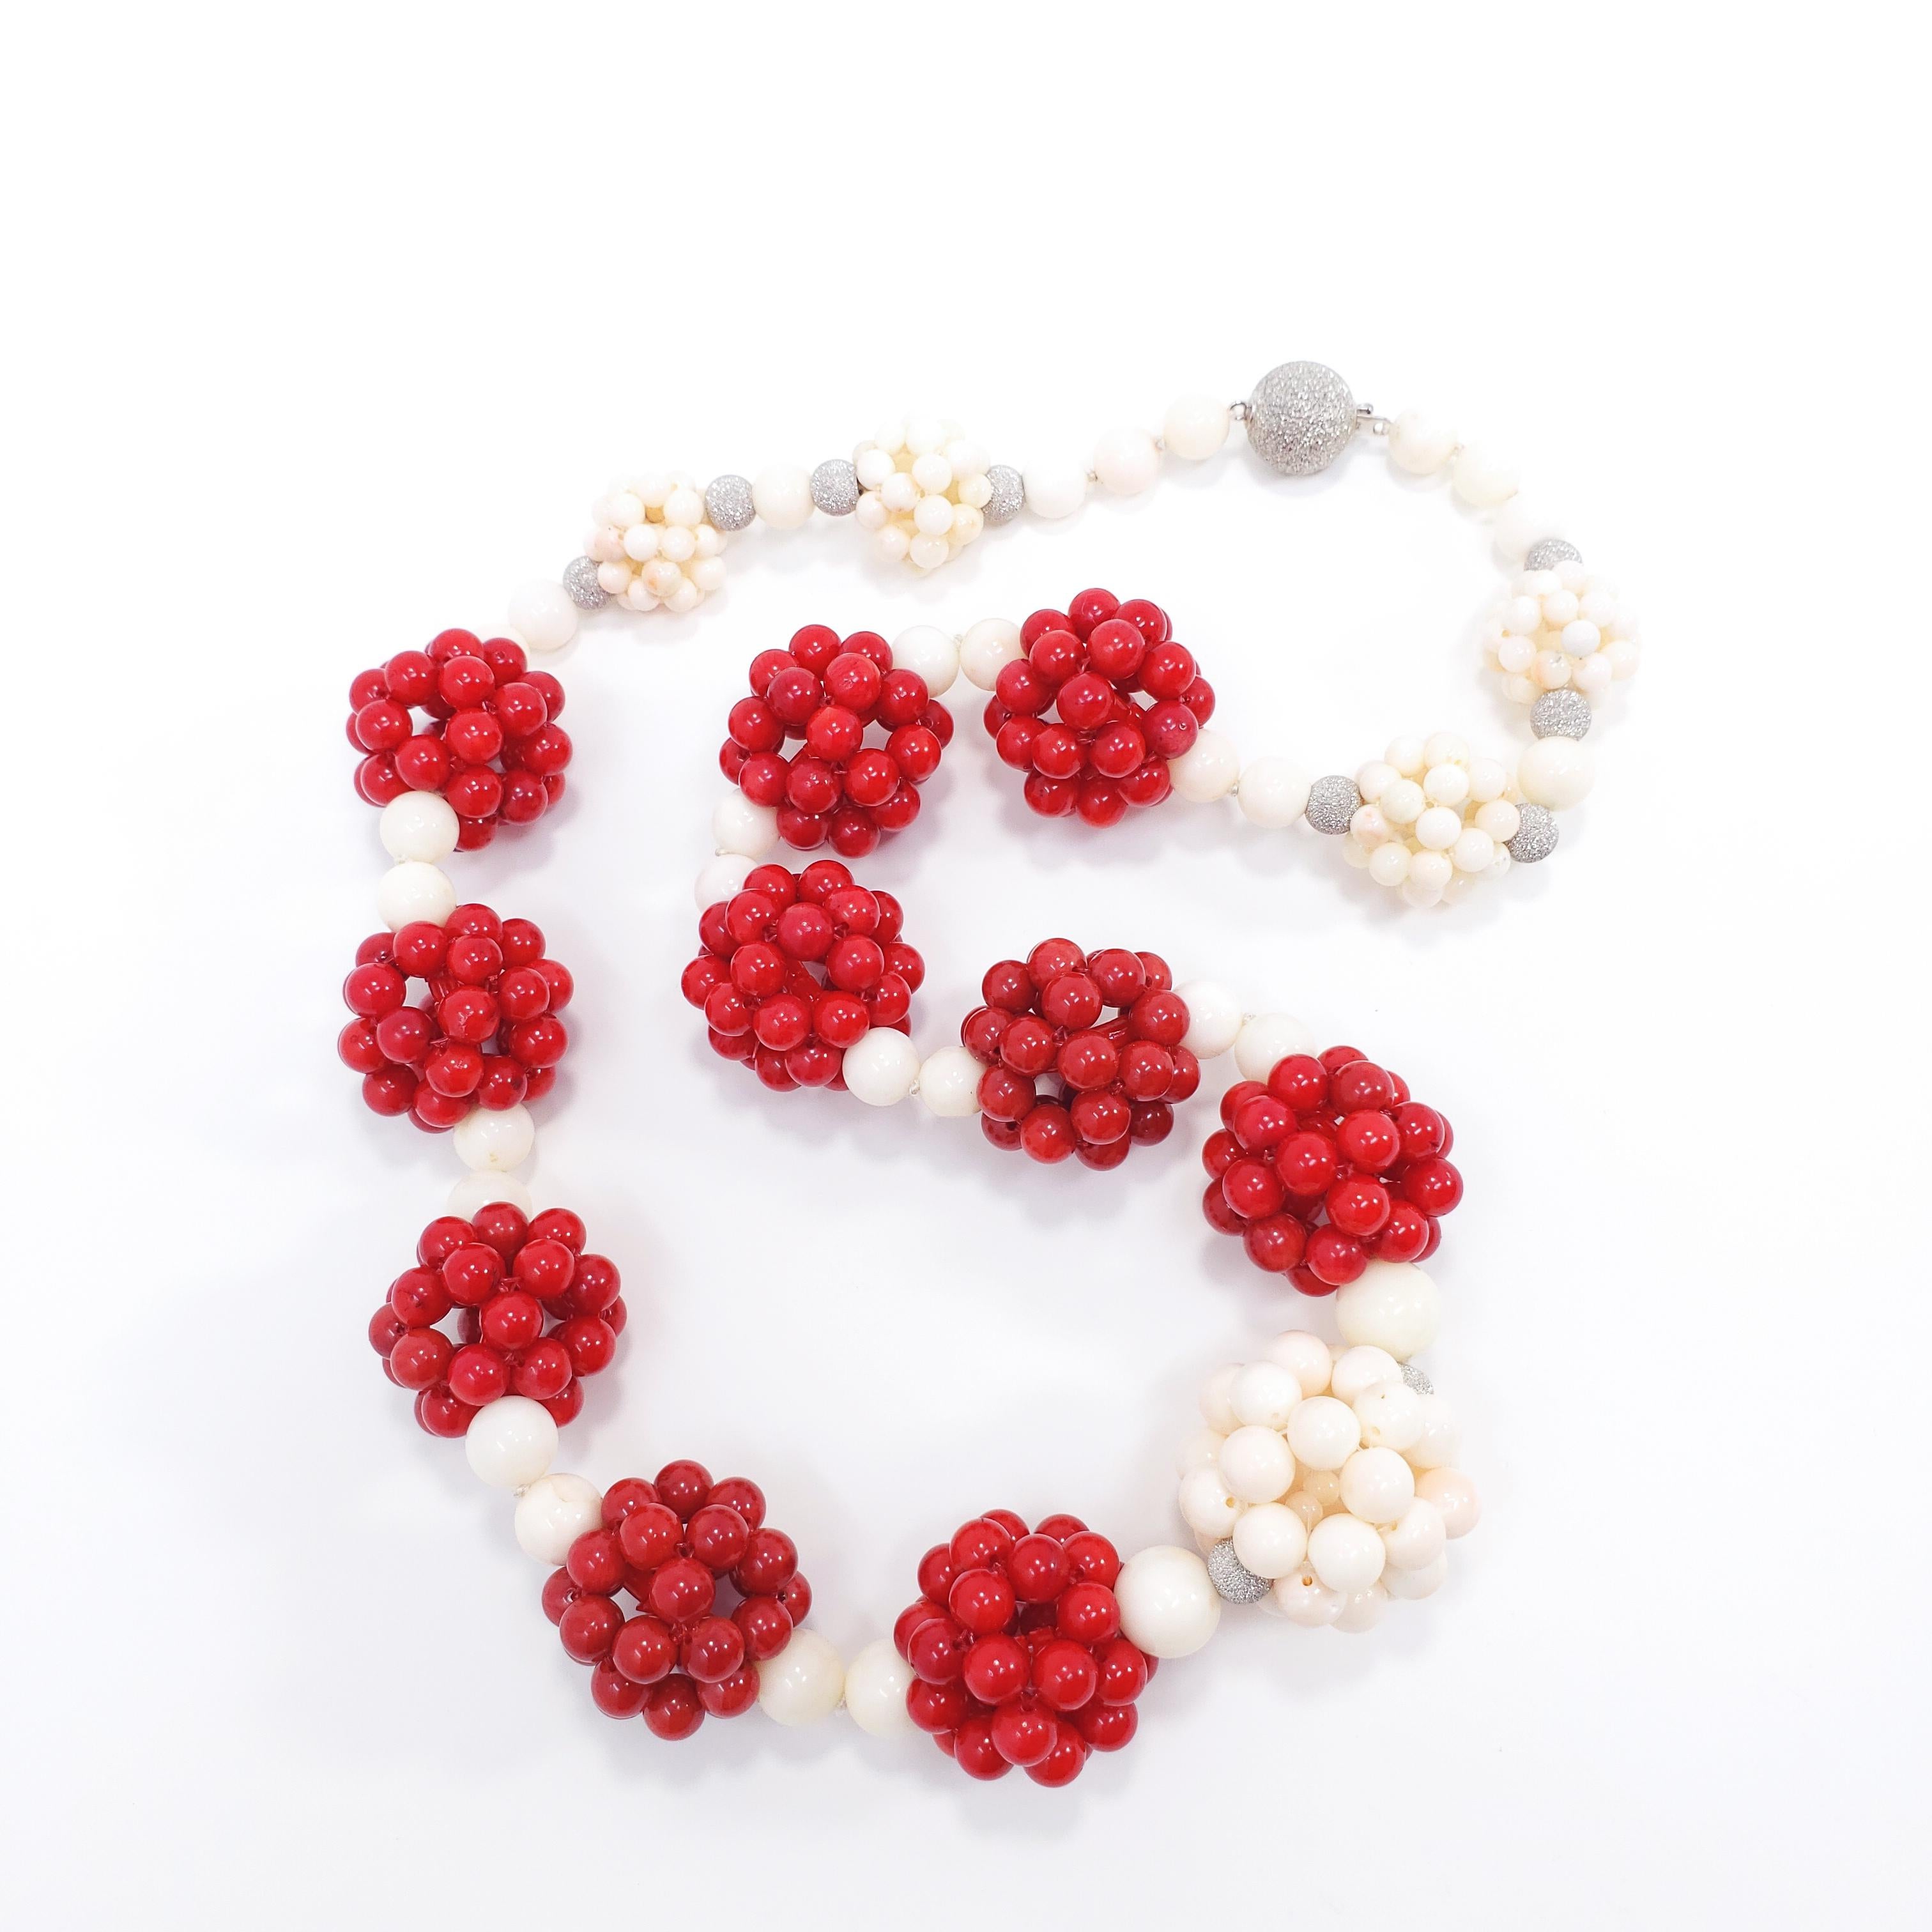 An exquisite red and white coral necklace! Features graduated genuine red coral and angel skin coral beads, accented with ornate coral clusters and 14K white gold findings. Fastened with a 14K white gold diamond dust ball clasp. Fit for